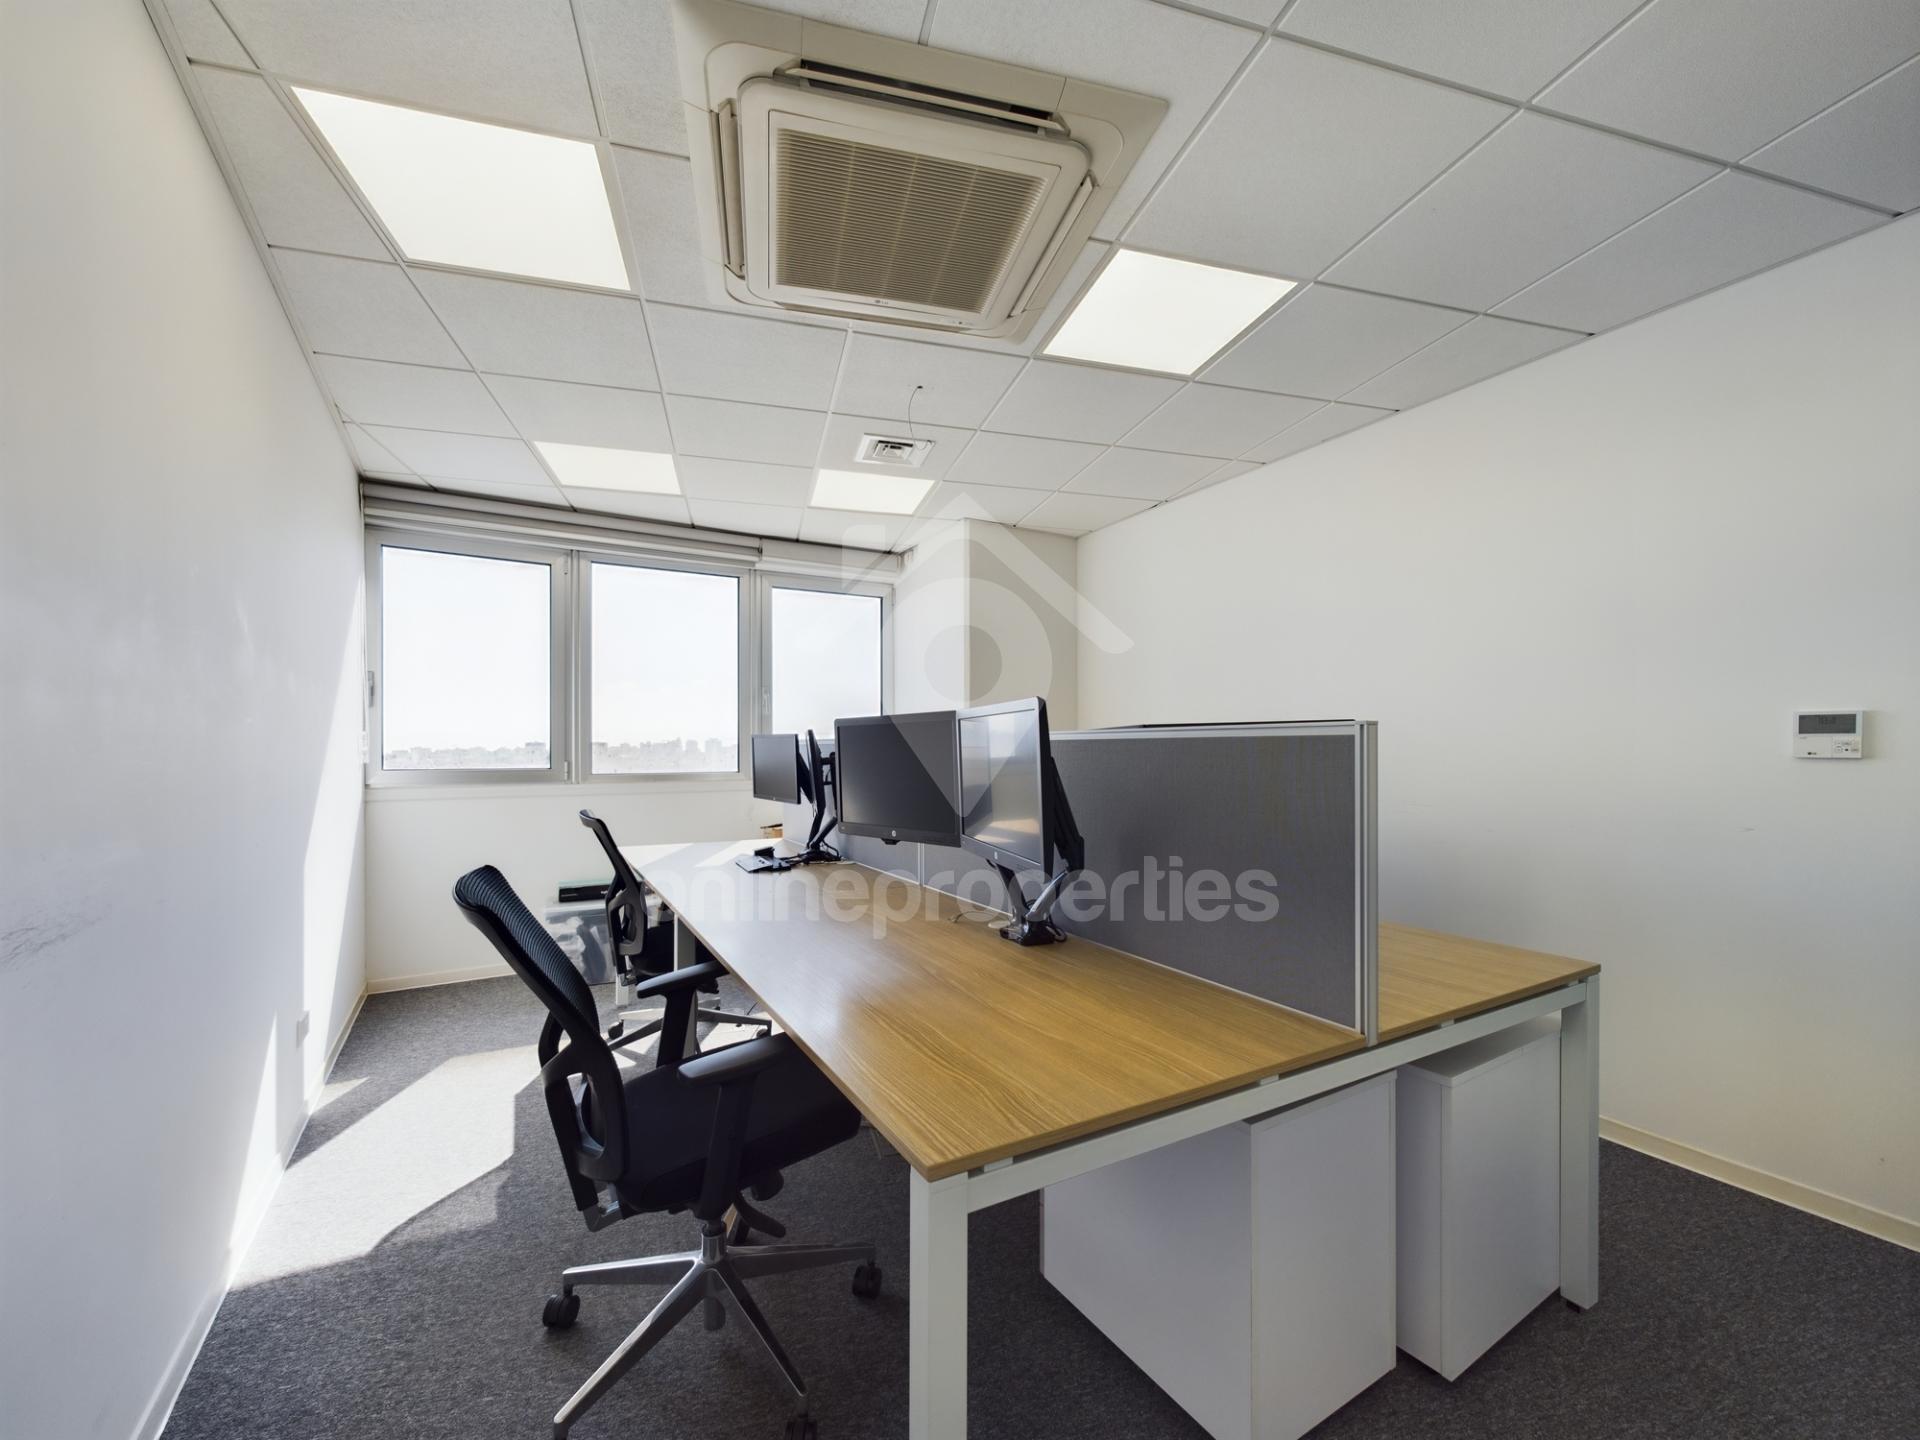 Modern offices in excellent condition, central location 